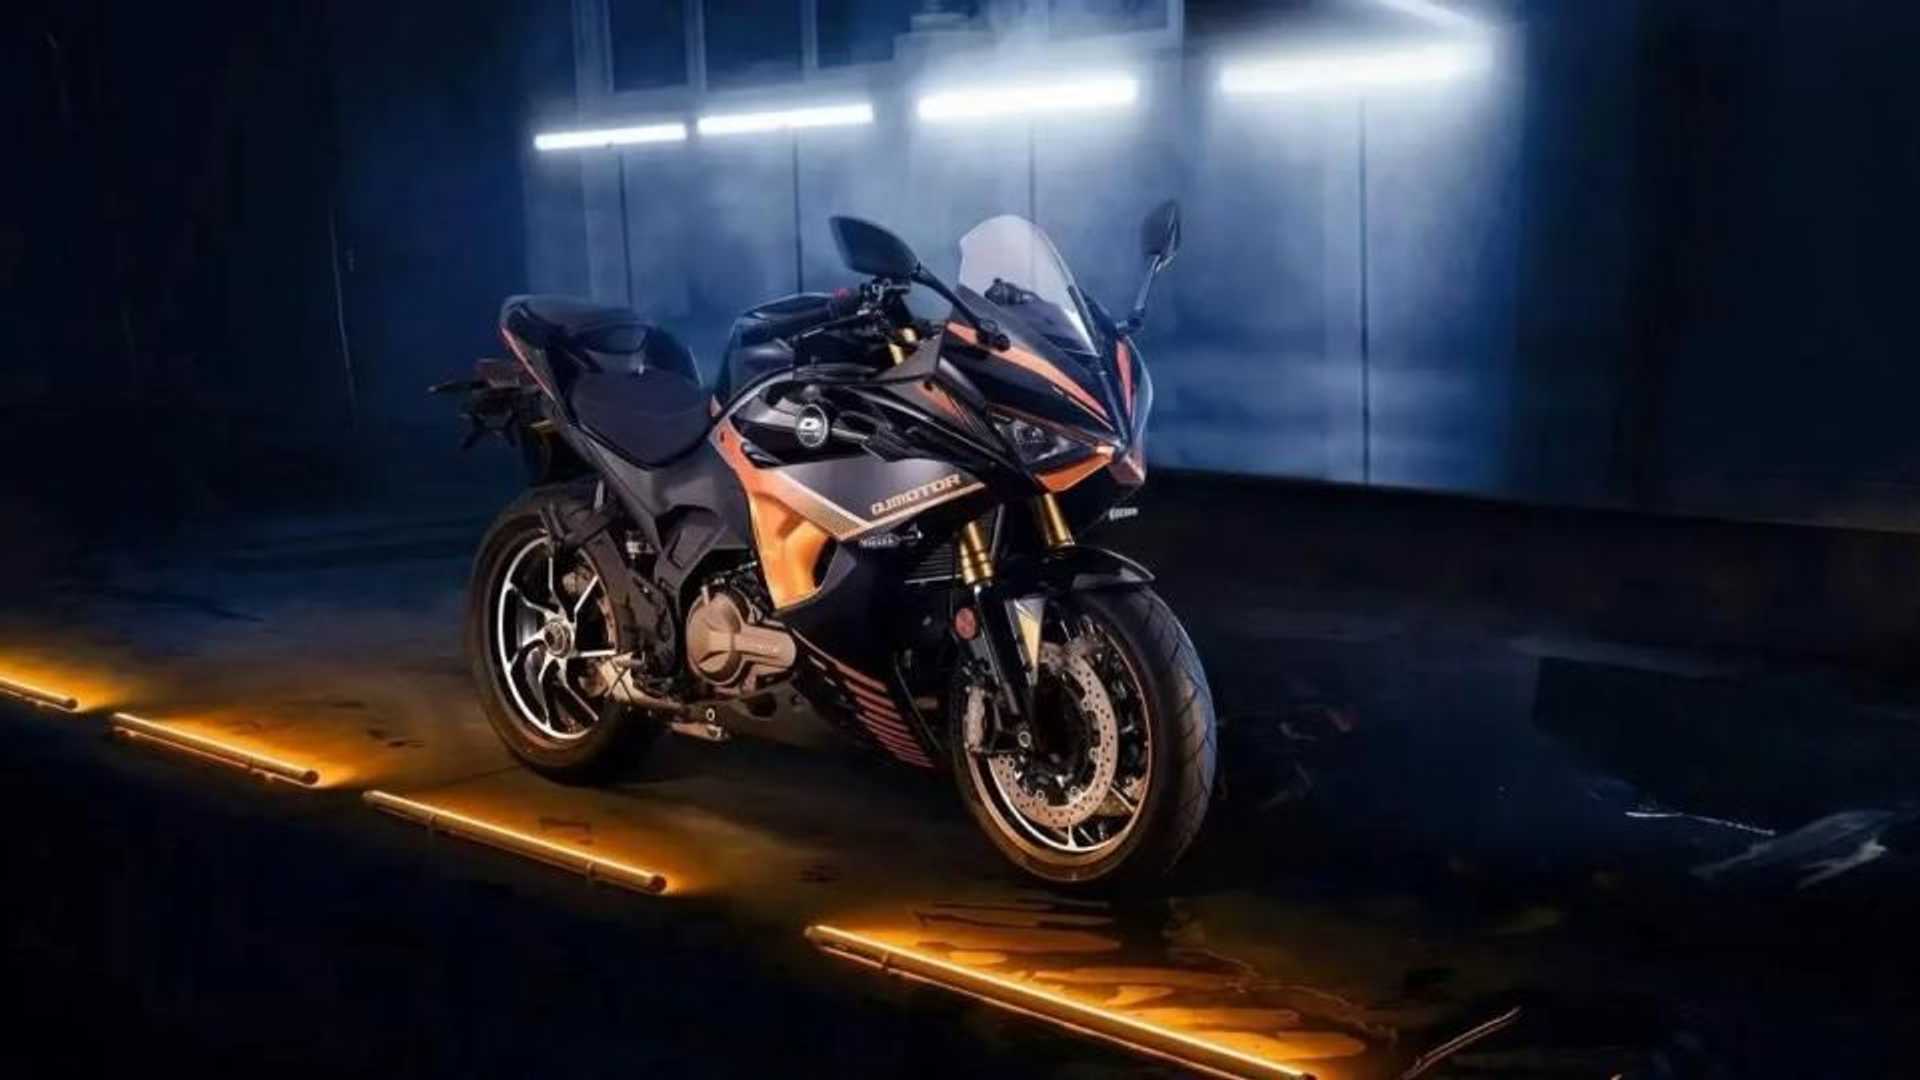 Price,India,Upcoming Bikes,Spec,Features,New,2021,2022,new gs550 sportbike,700cc sportbike and naked bike from qj motor,qj motors bike,qj motor,qj motor 650 adventure bike,2022 qj motor srt 550,qj motor srv 550,sportbike breaks cover,qj motor v-twin 650 adventure bike,motos deportivas baratas,2022 qj motor srt 750,motor has built,QJ Motor GS550 Sportsbike Walkaround,QJ Motor GS550 Sportsbike,QJ Motor GS550 Sportsbike India,QJ Motor GS550 Sportsbike Price